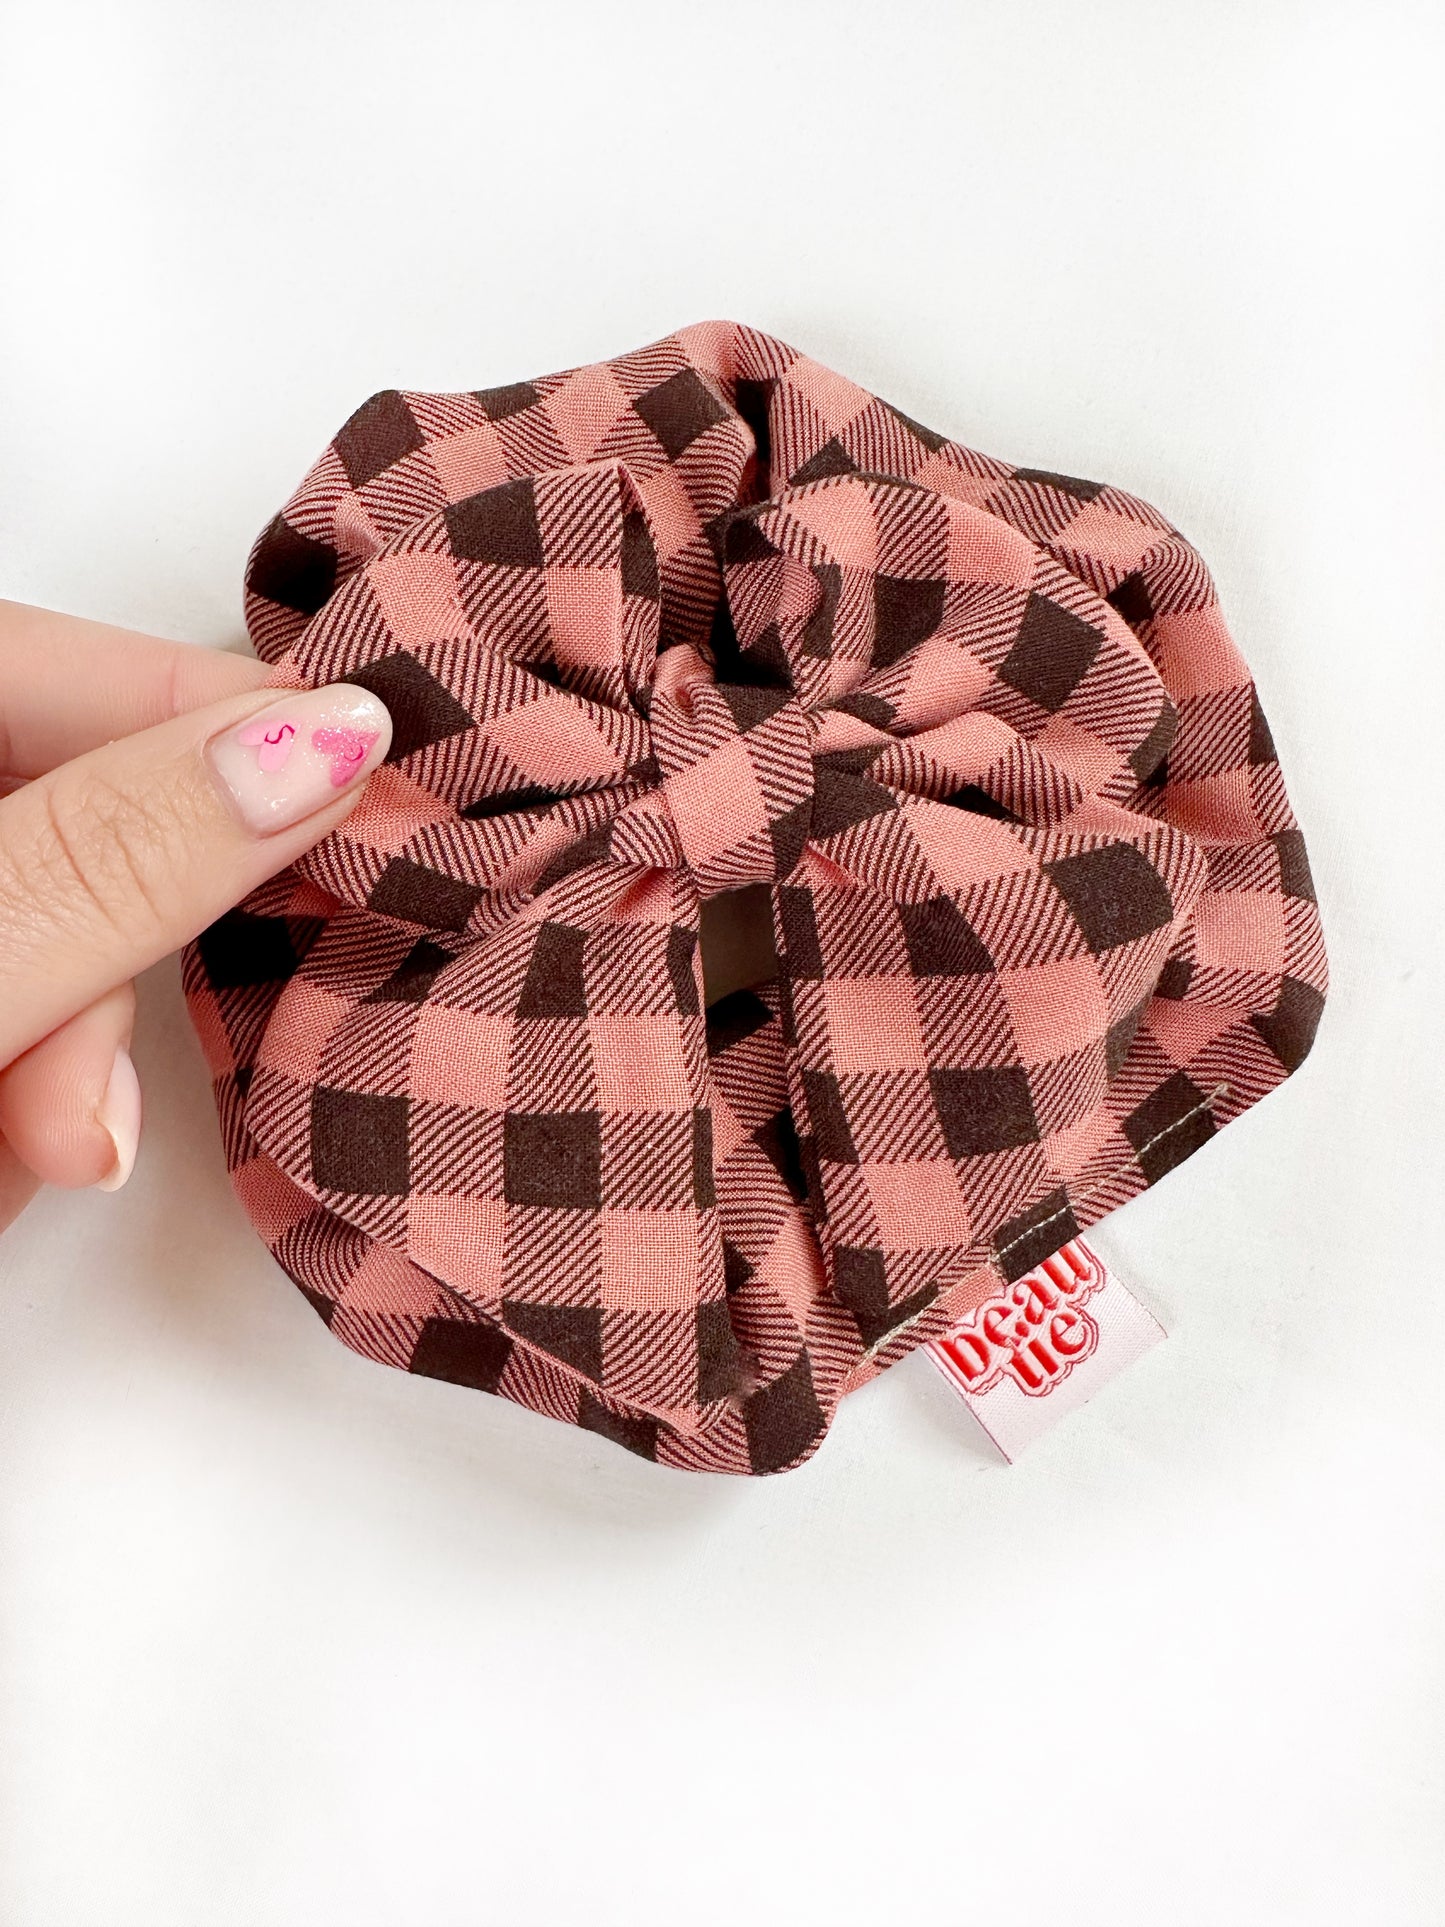 Scrunchie and hair bow gift set in gingham